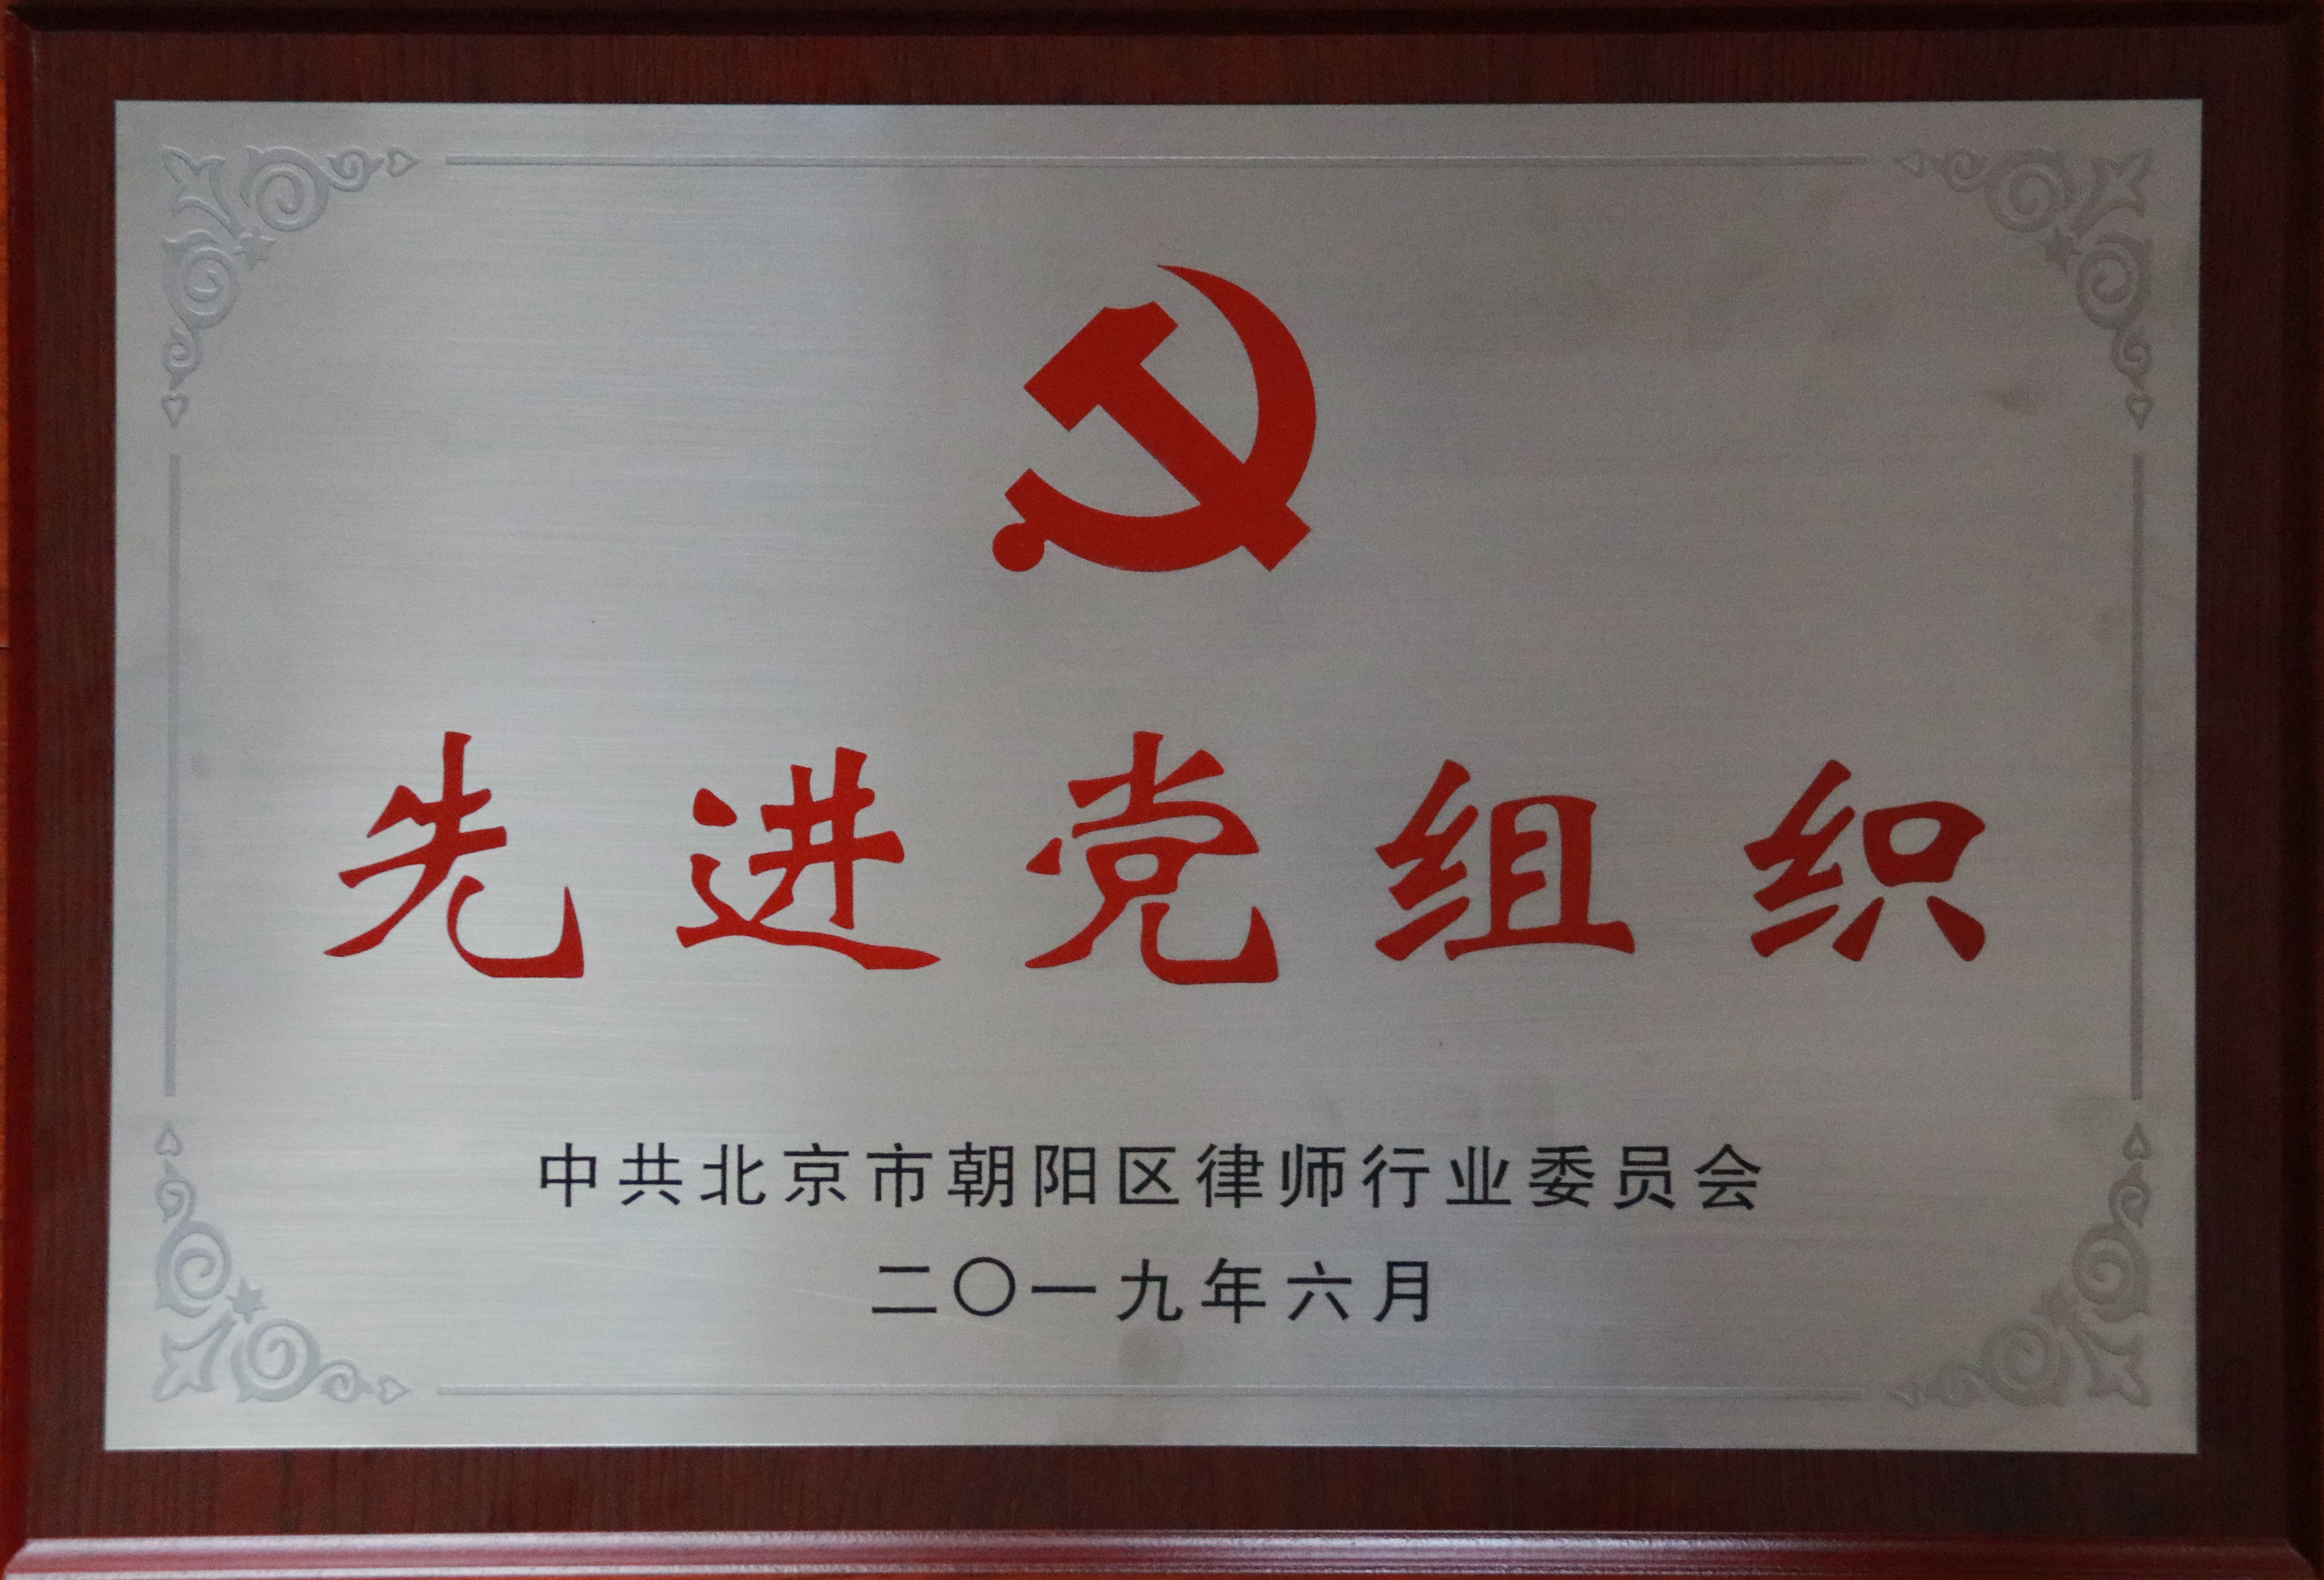 Beijing Chaoyang District lawyers Committee of the Communist Party of China